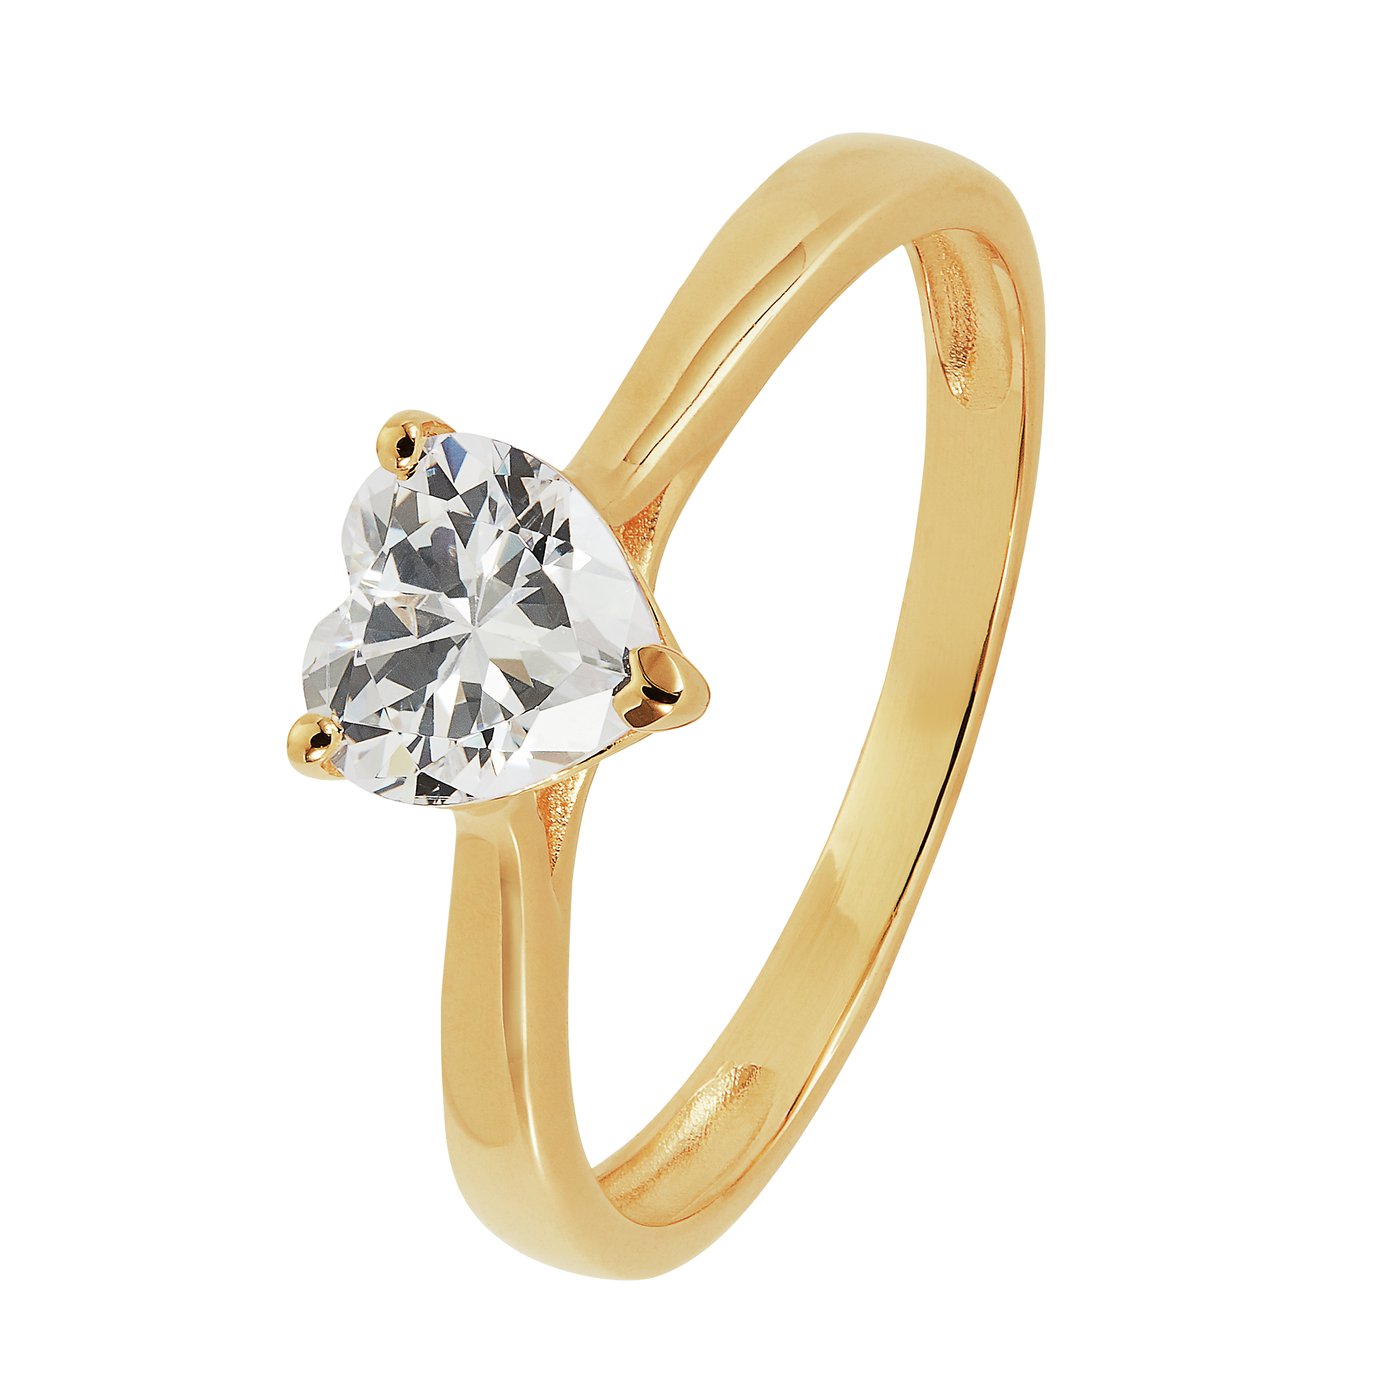 Revere 9ct Gold Cubic Zirconia Engagement Ring - L